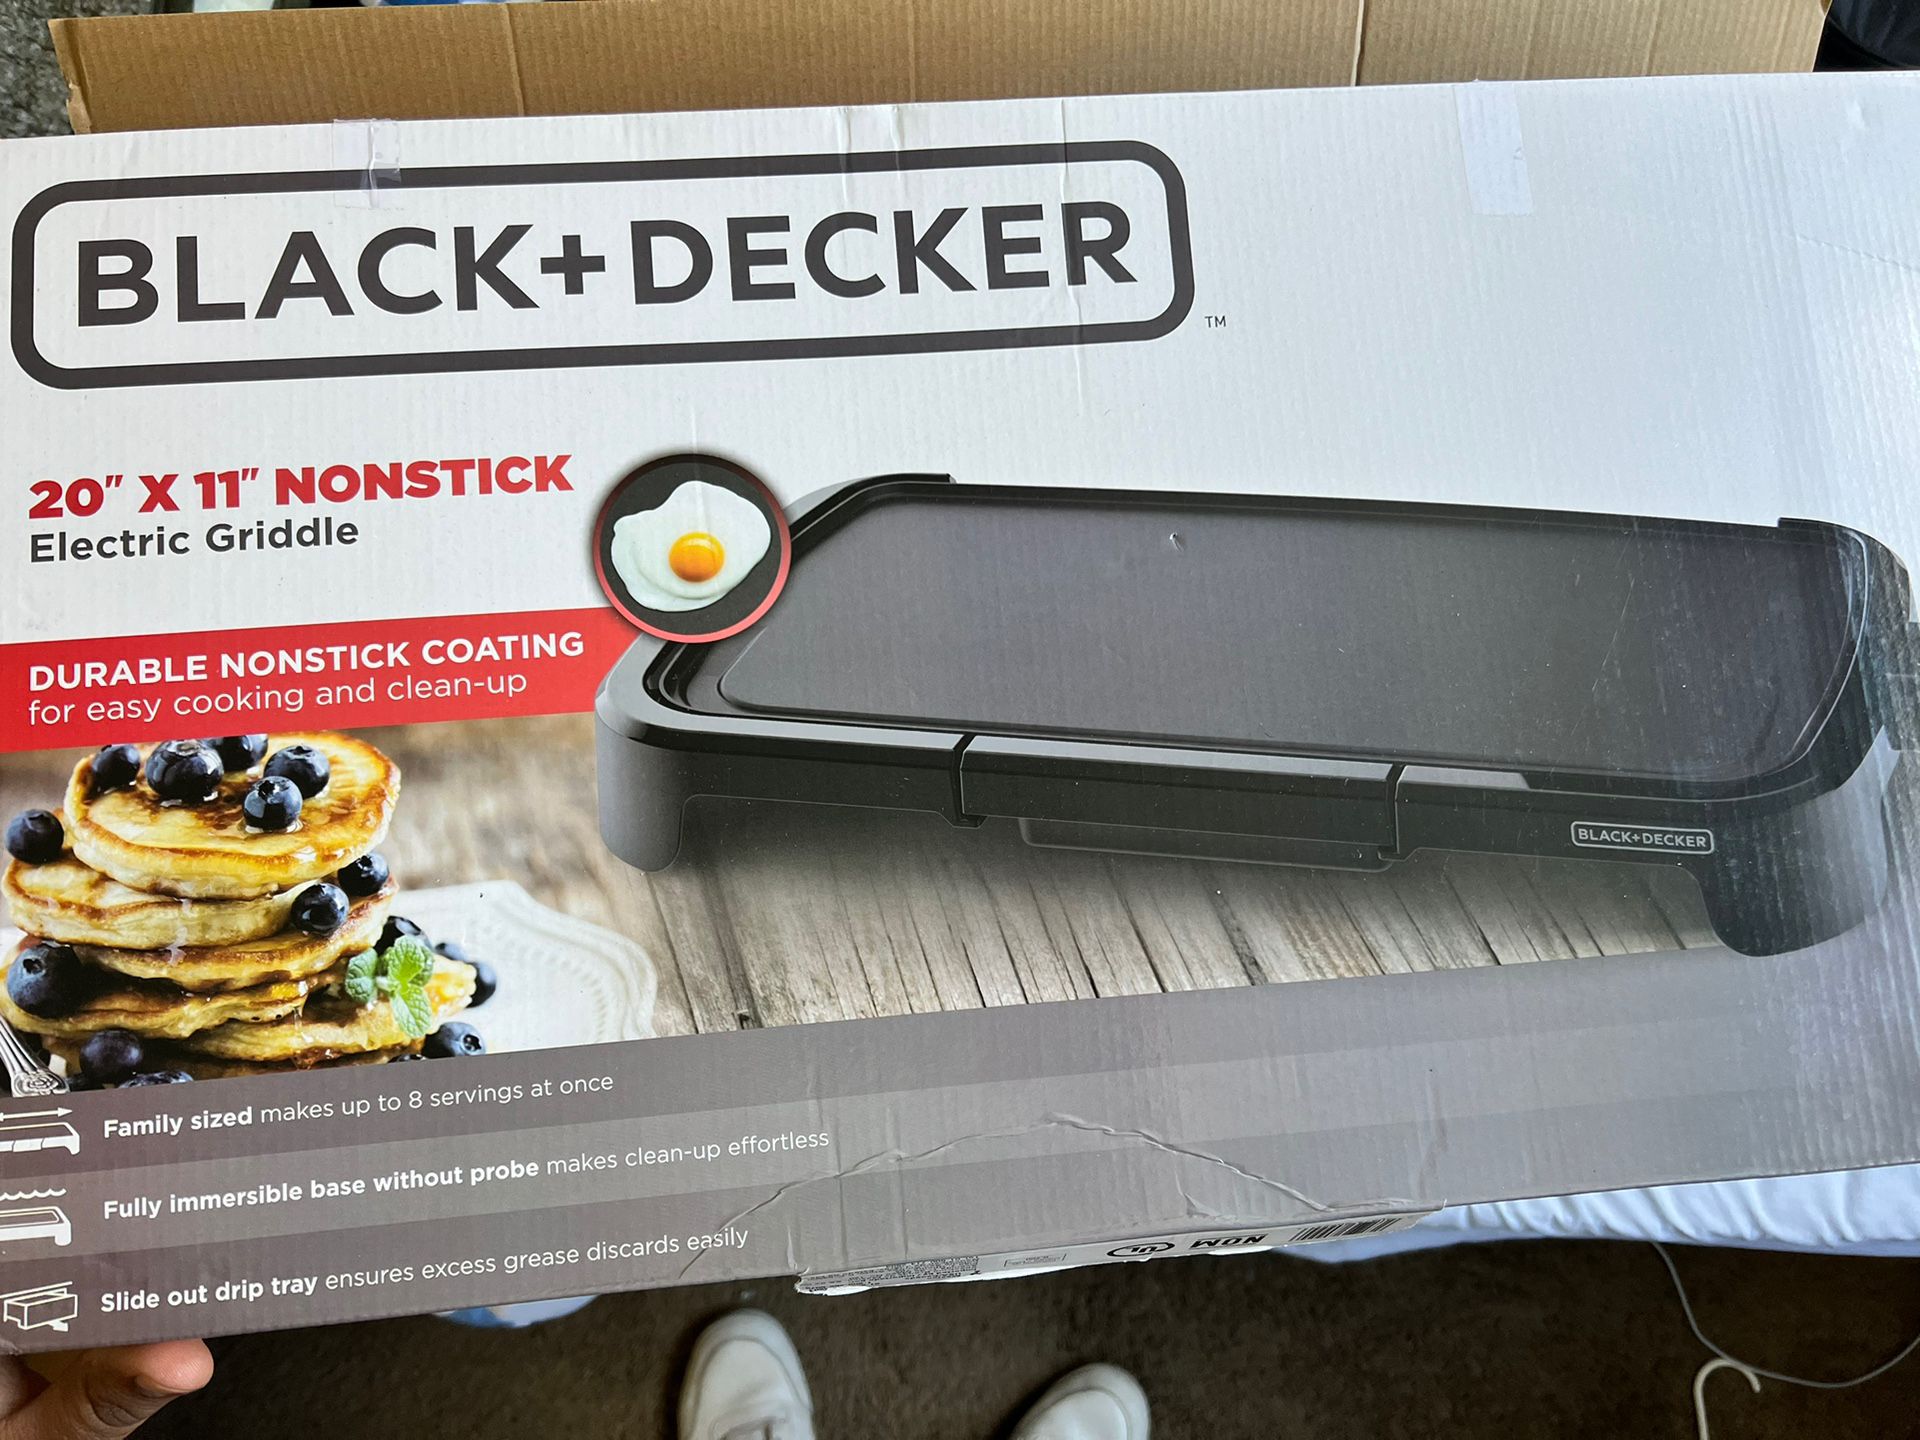 BLACK+DECKER Family-Sized Electric Griddle - Black - GD2011B for